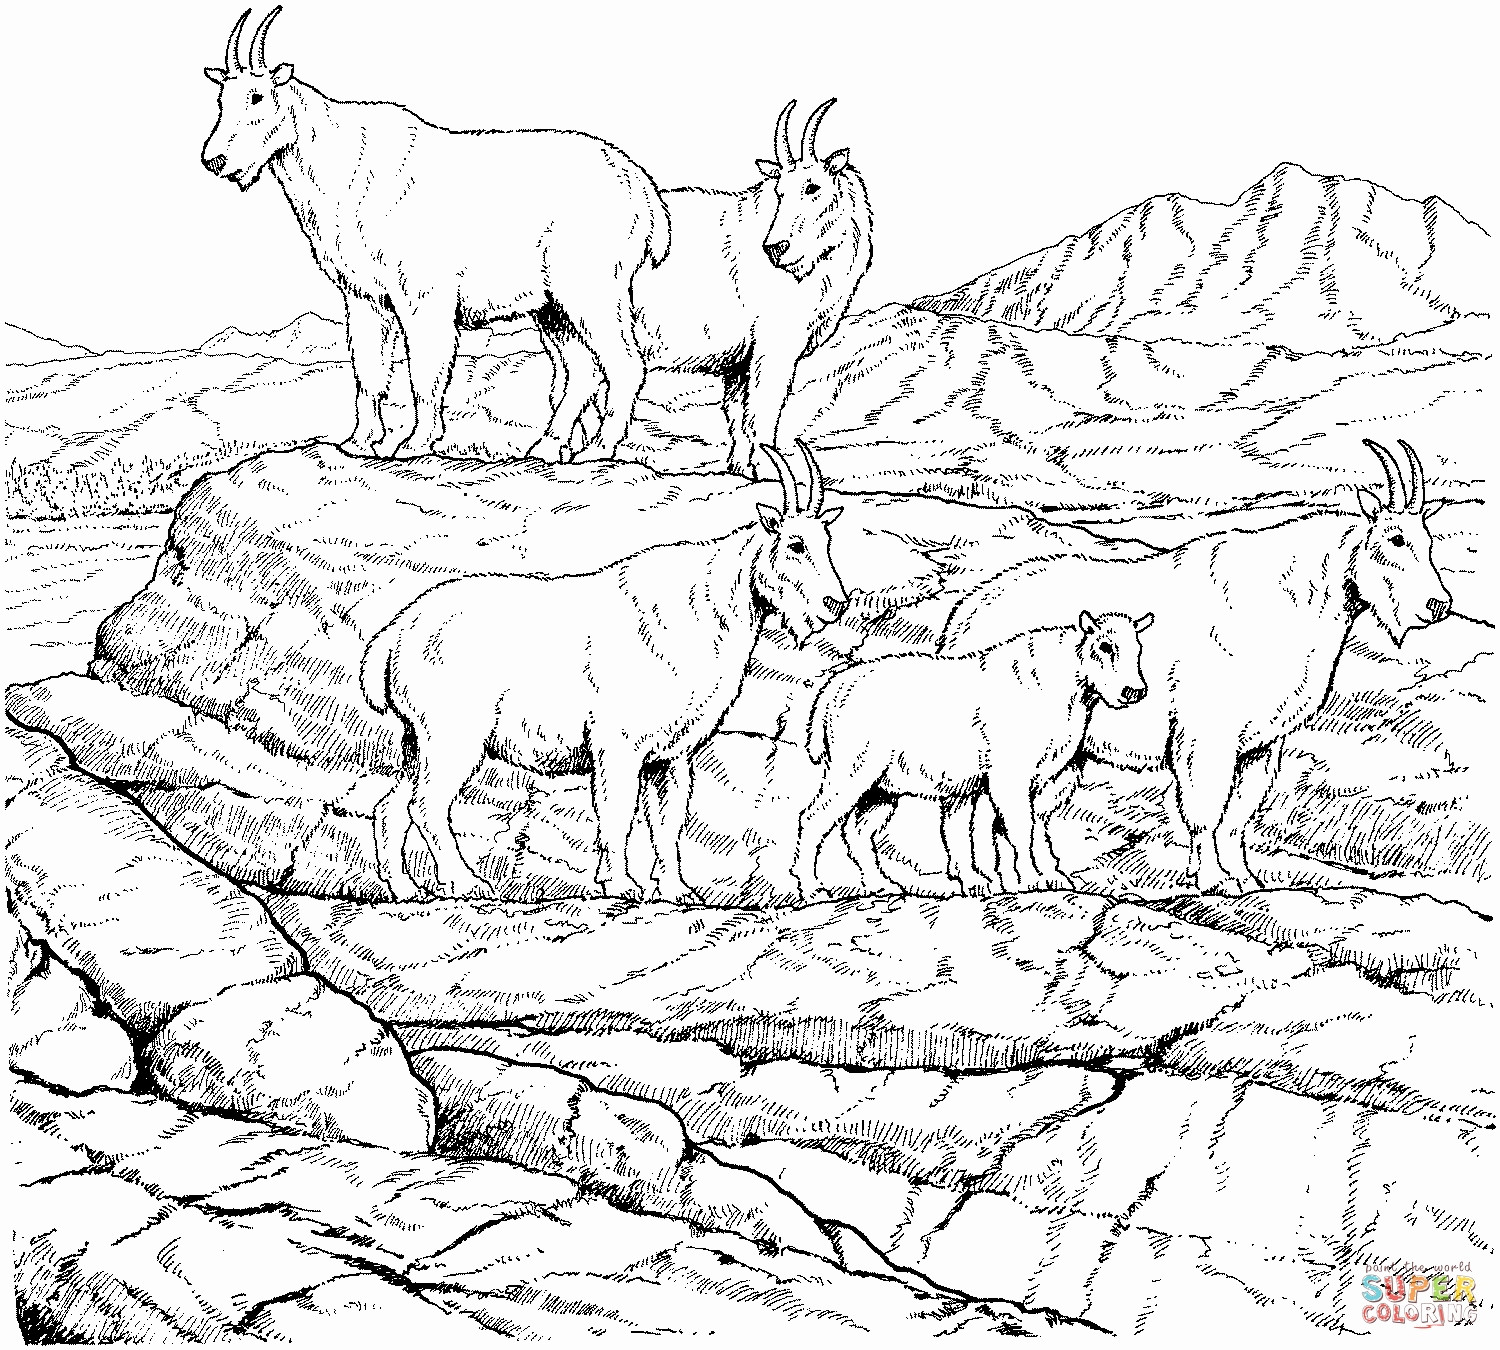 Three Billy Goats Gruff Coloring Pages At Free Printable Colorings Pages To